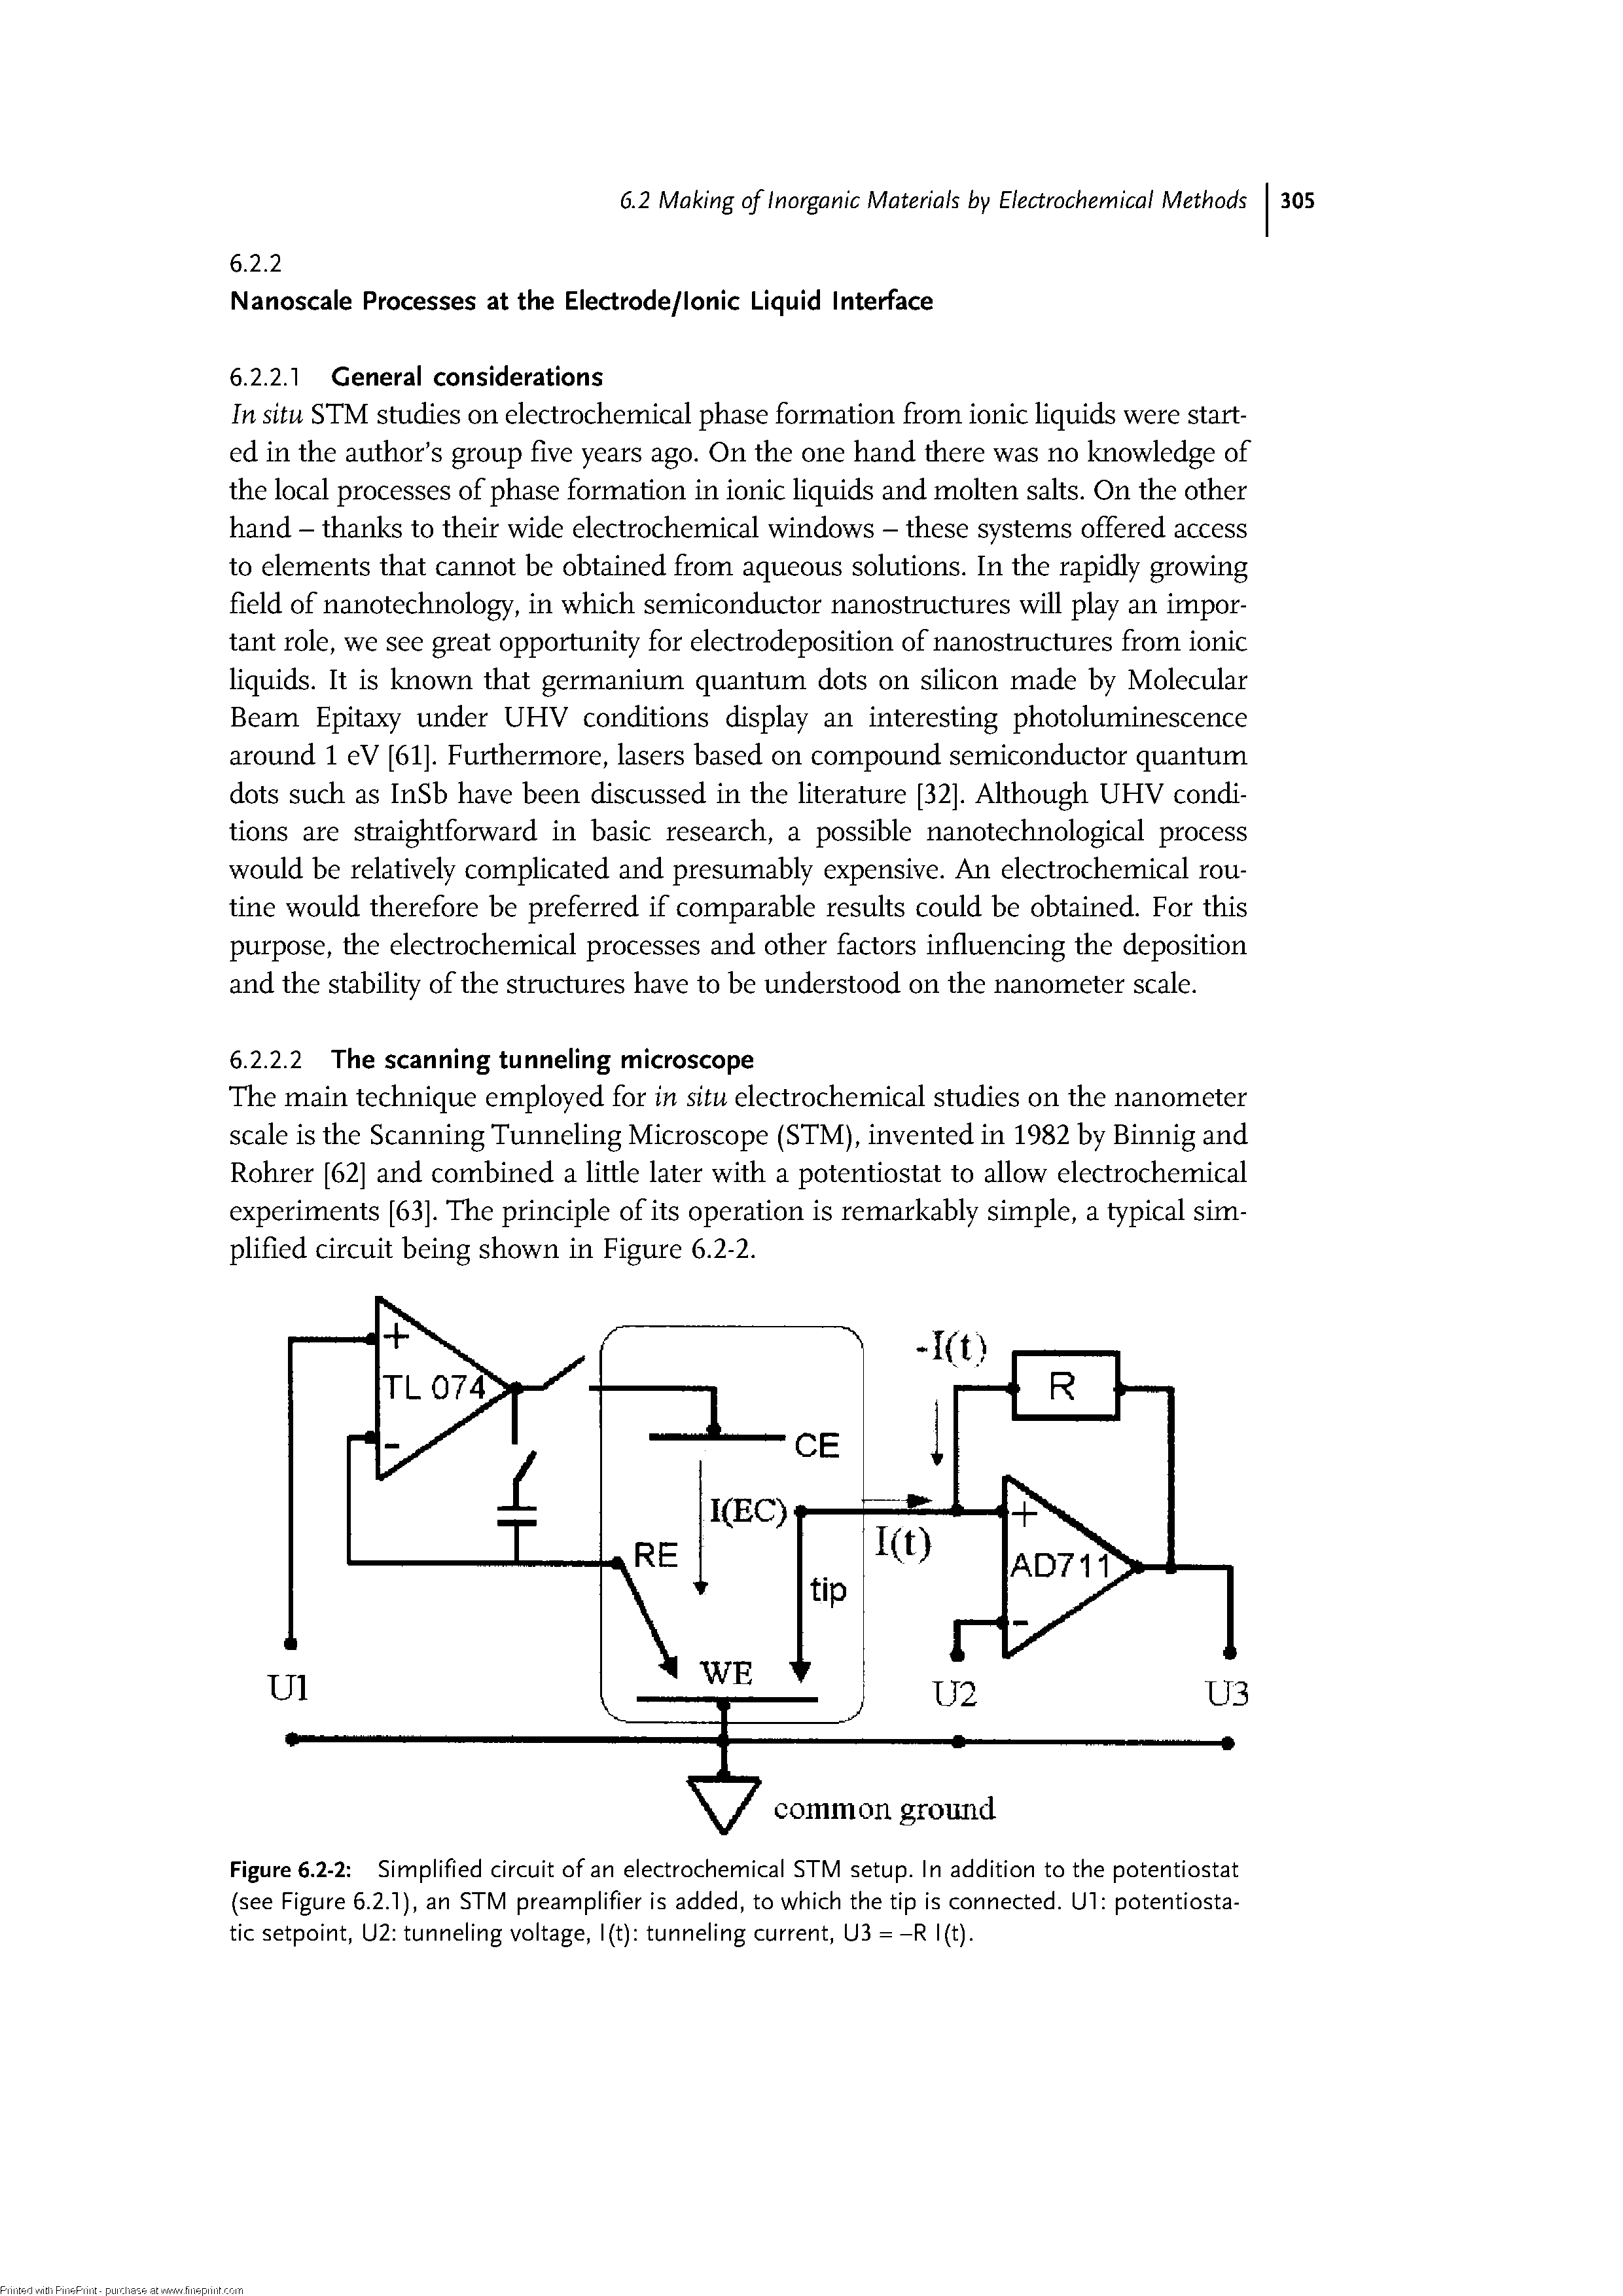 Figure 6.2-2 Simplified circuit of an electrochemical STM setup. In addition to the potentiostat...